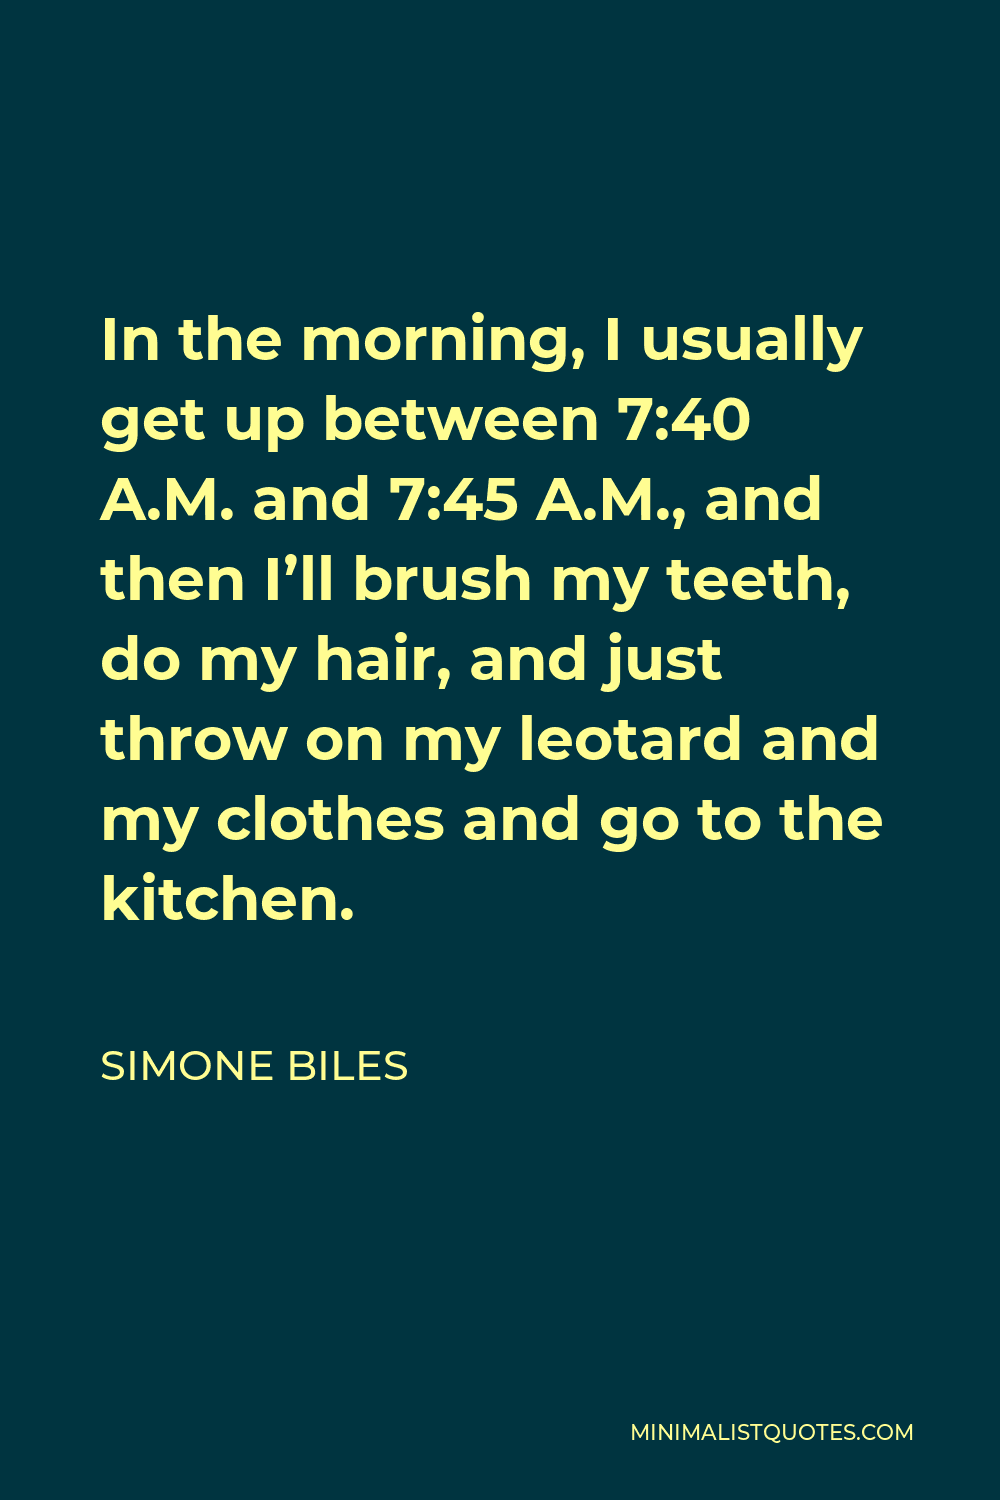 Simone Biles Quote - In the morning, I usually get up between 7:40 A.M. and 7:45 A.M., and then I’ll brush my teeth, do my hair, and just throw on my leotard and my clothes and go to the kitchen.